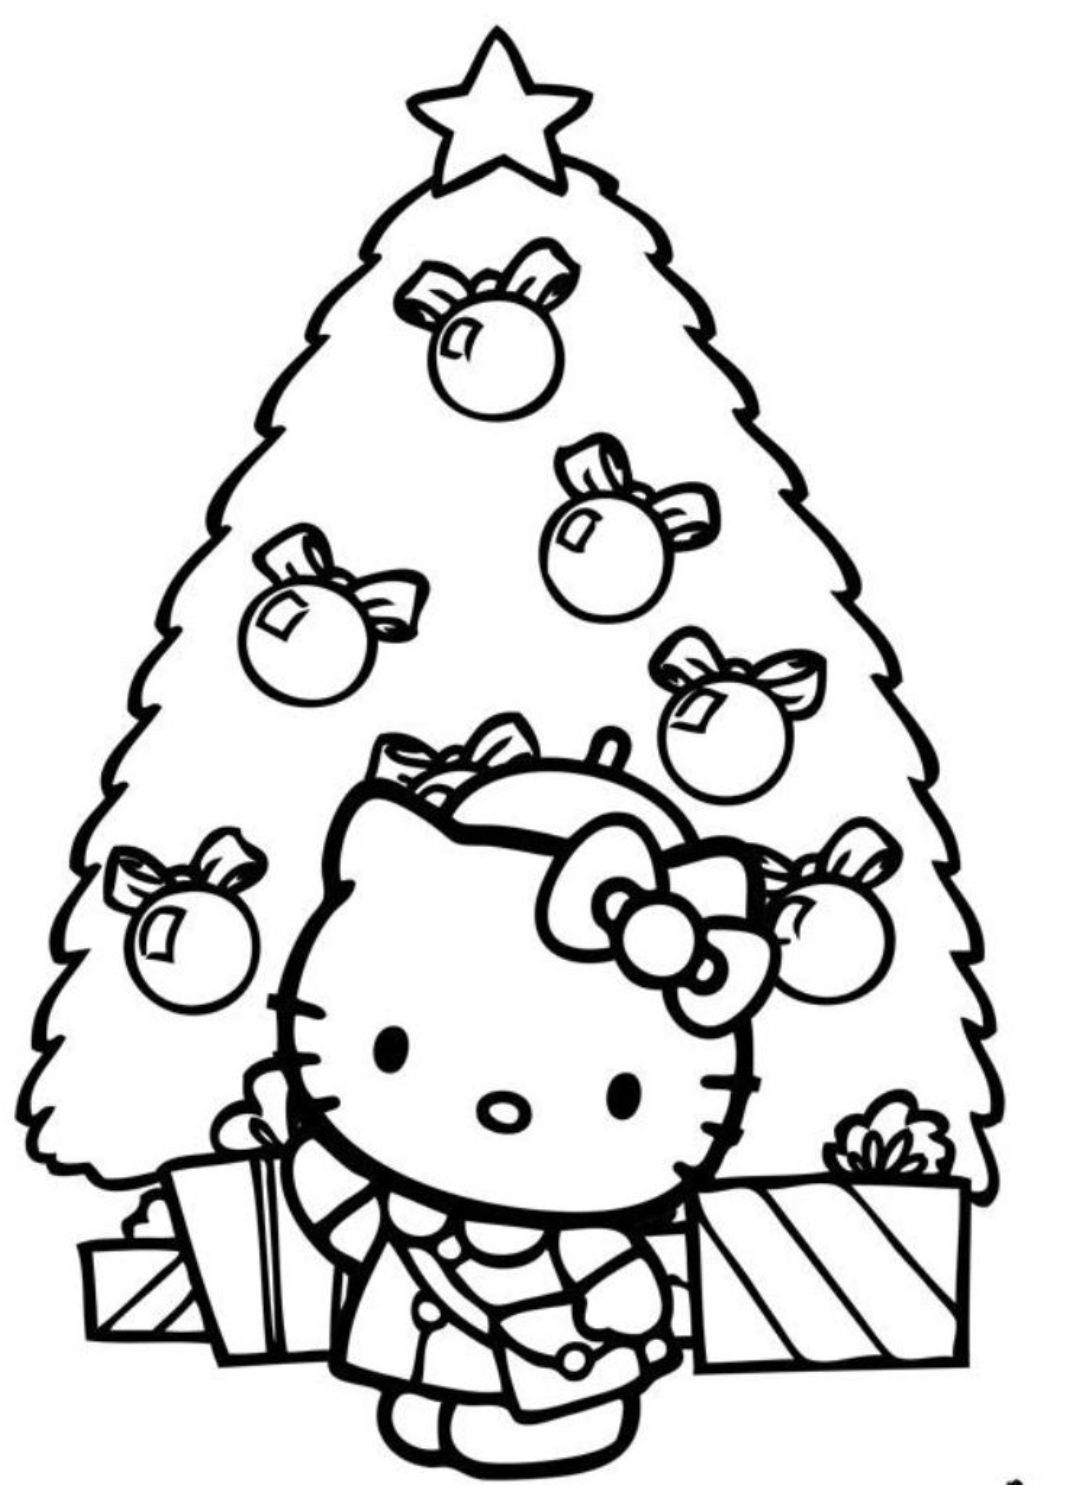 Hello Kitty Coloring Pages   Coloring Cool